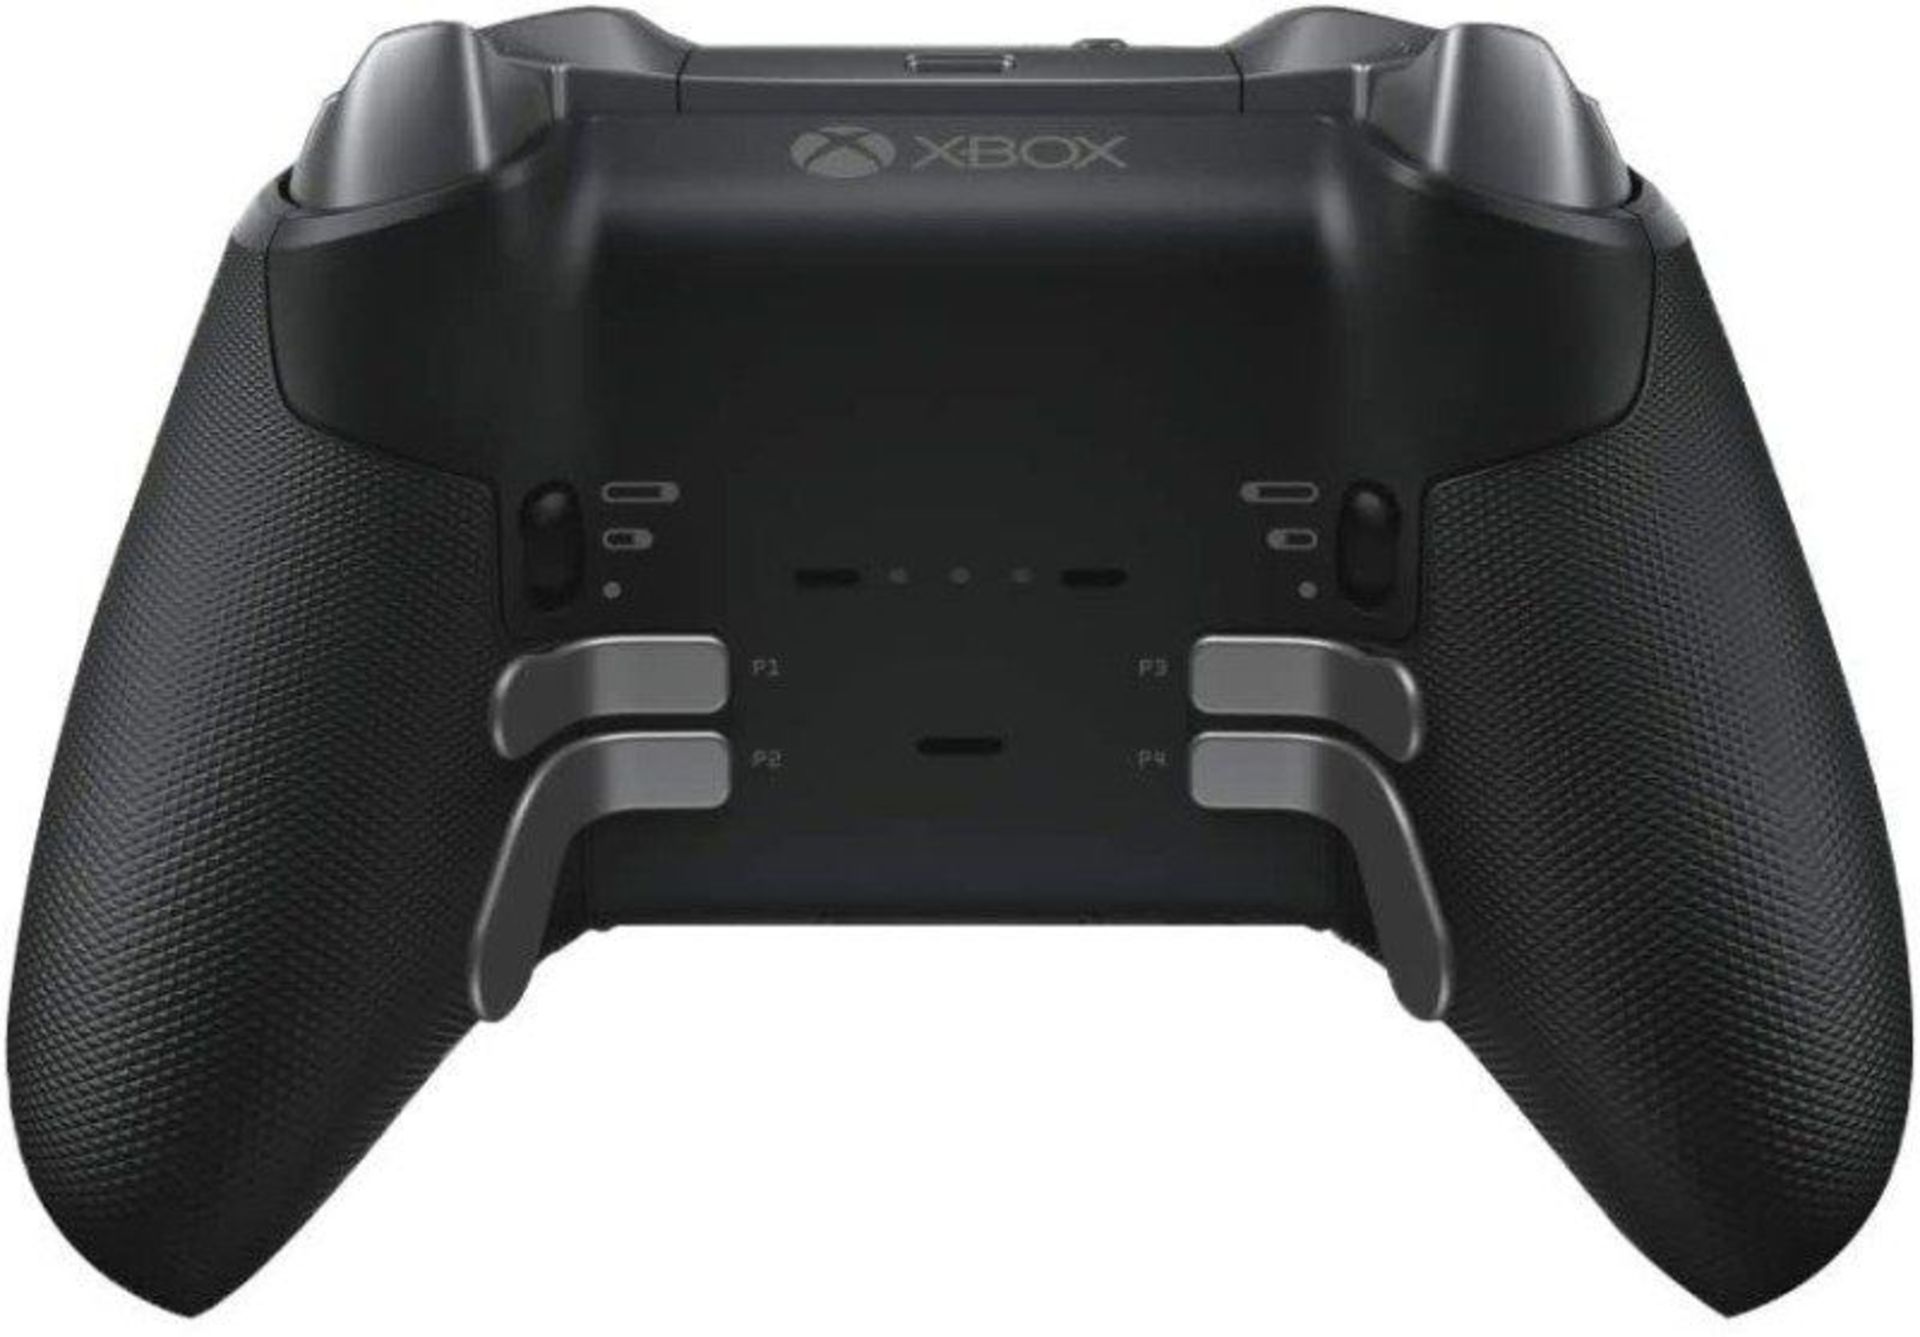 Microsoft Official Xbox Elite Wireless Controller Series 2 - Black. - P2. RRP £199.00. Experience - Image 2 of 2